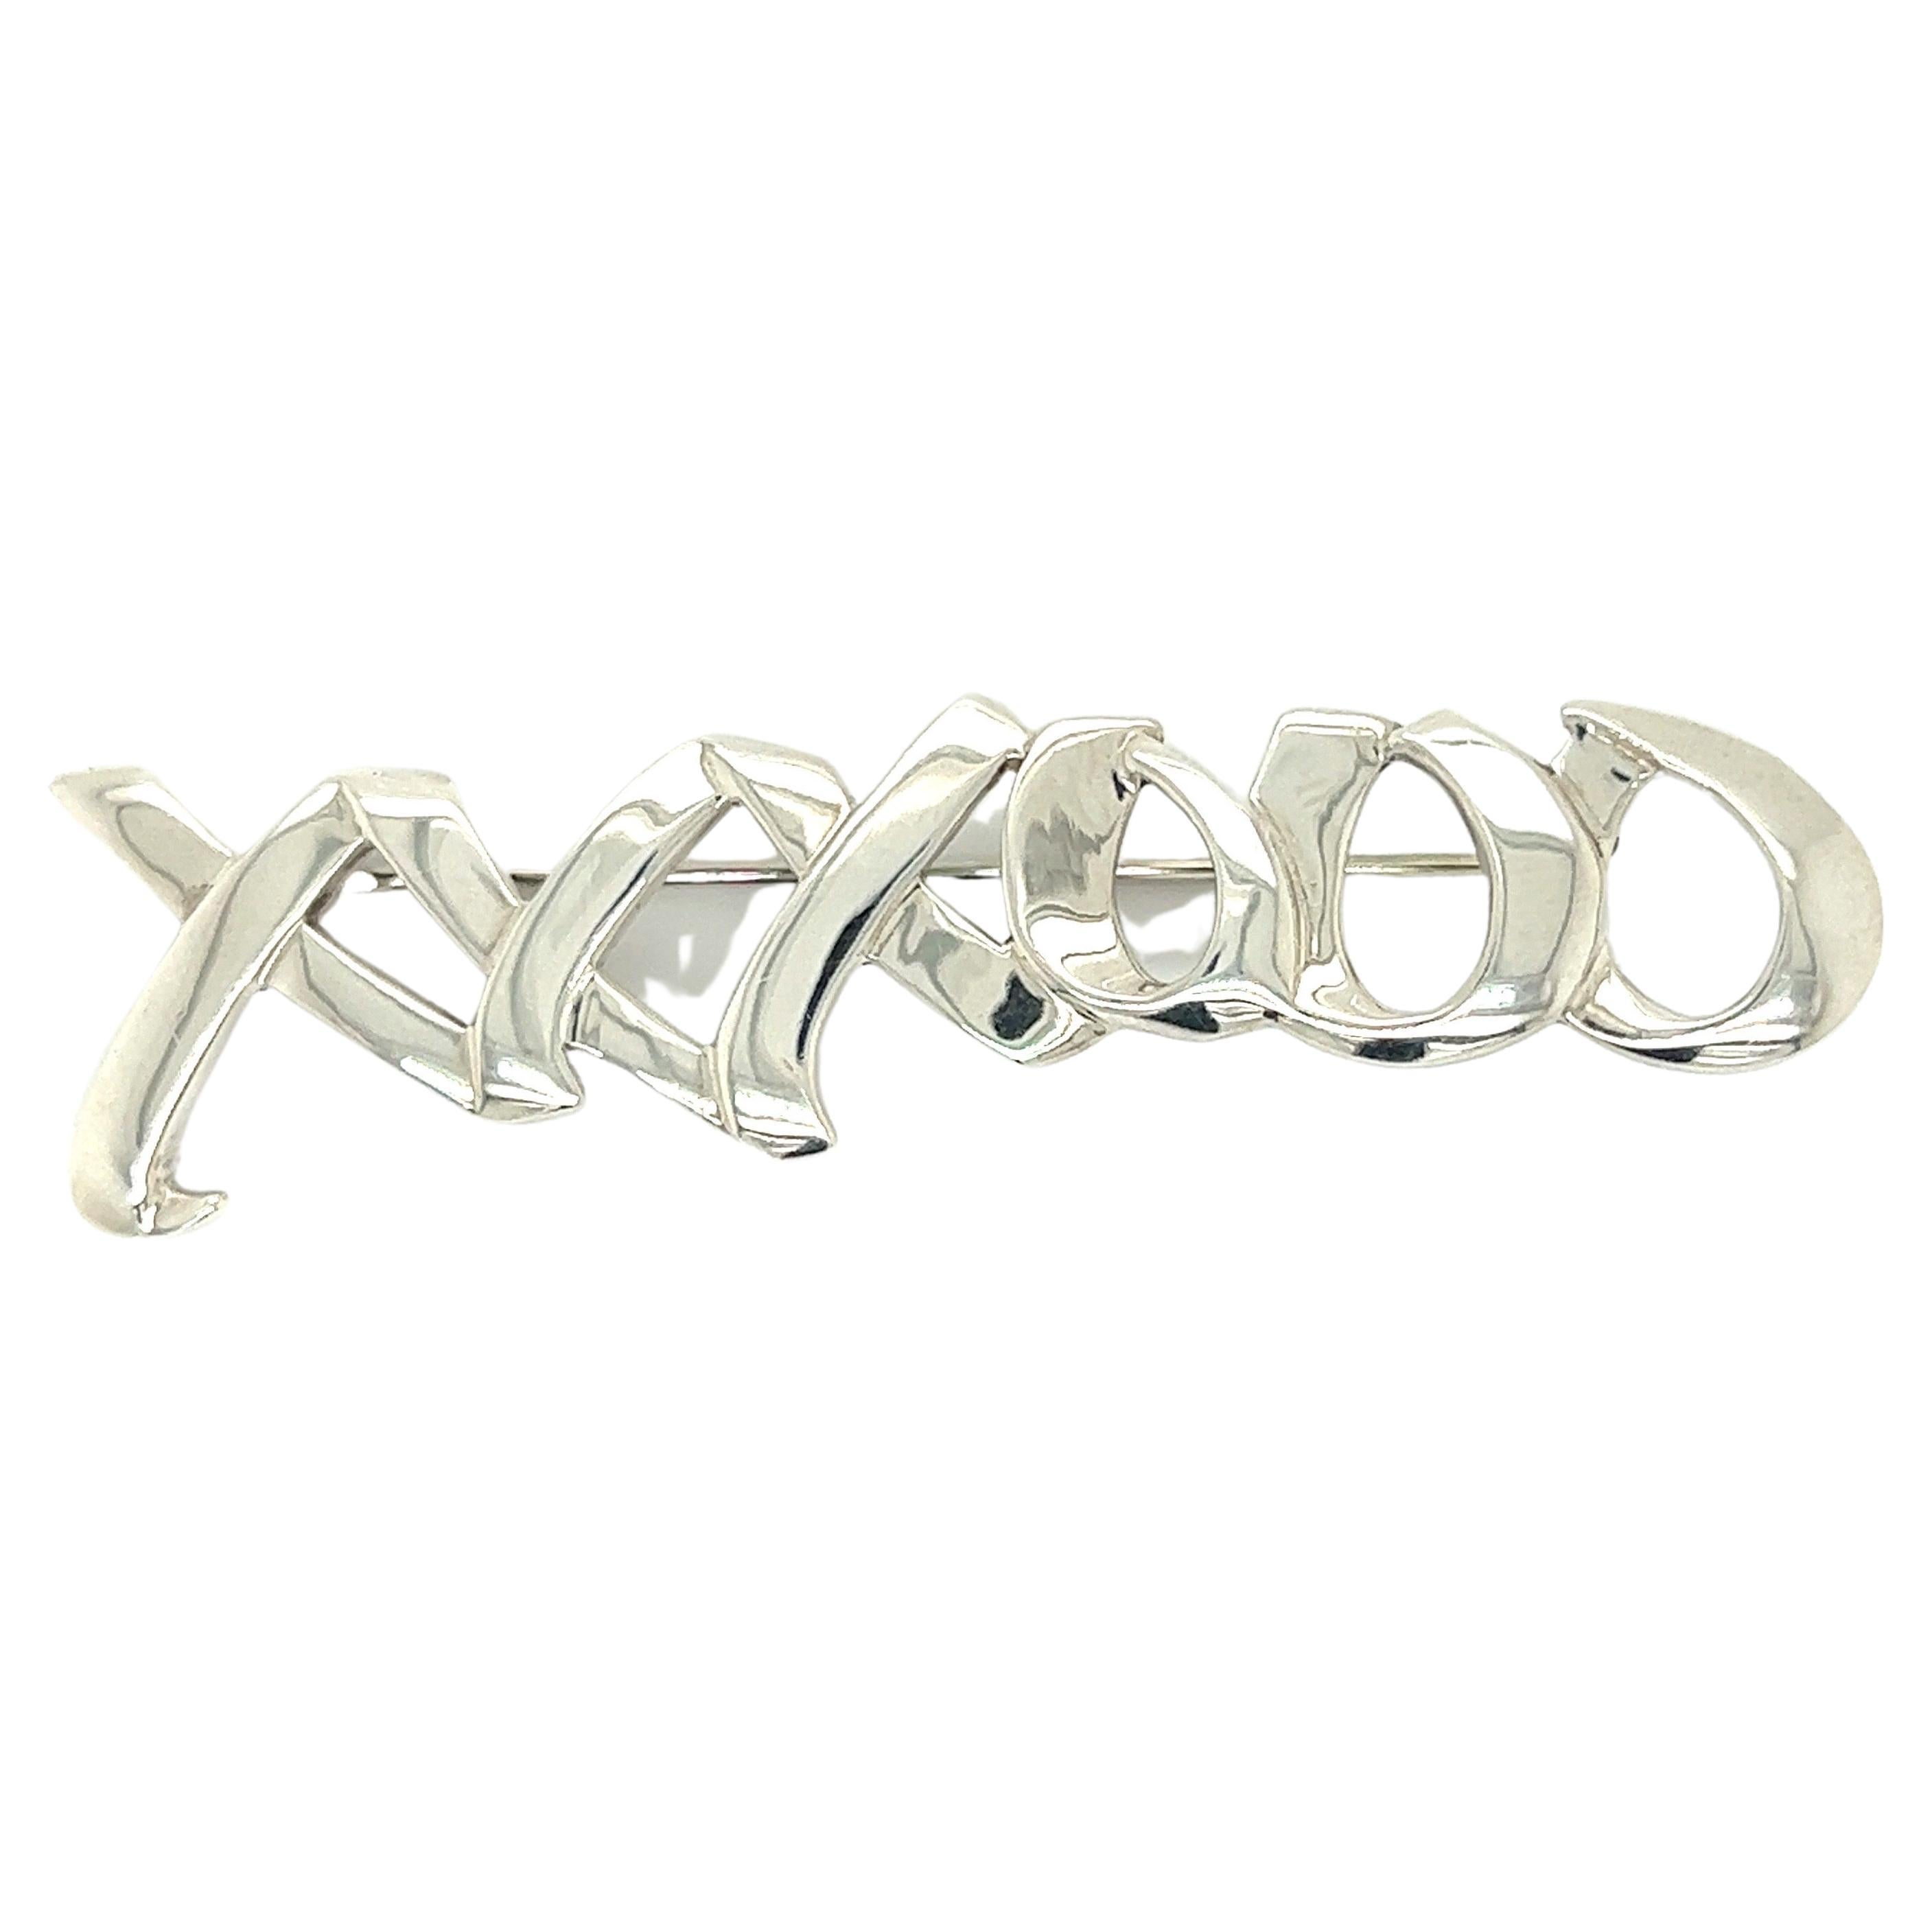 The Iconic silver hugs and kisses brooch by Paloma Picasso for Tiffany & Co. Stamped on the back.  Metal weight is 8.03 grams.  The brooch measures 13 mm x 68 mm.